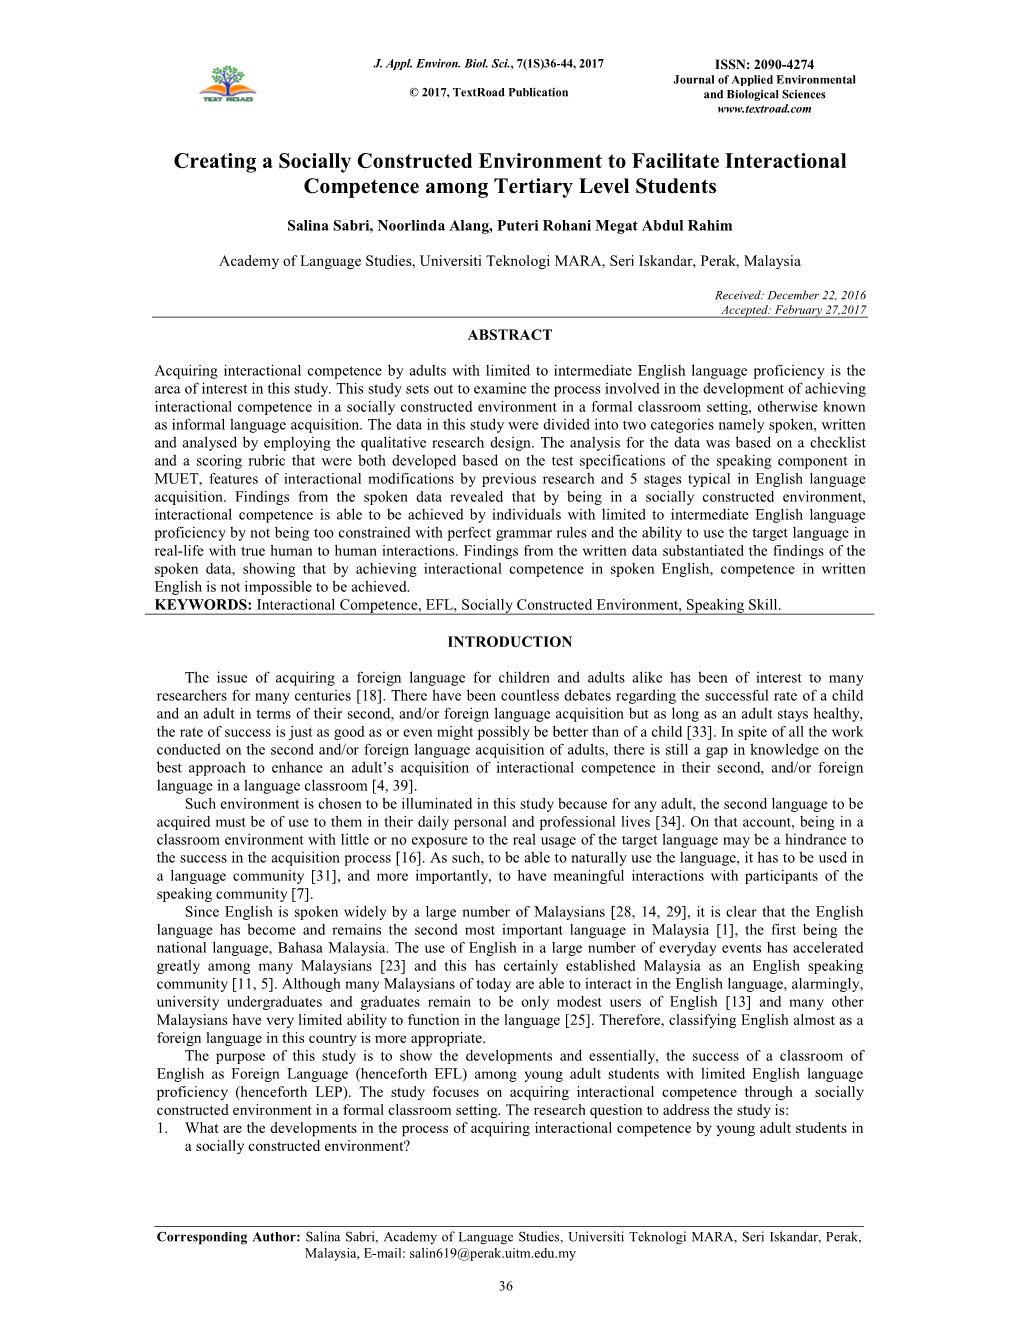 Creating a Socially Constructed Environment to Facilitate Interactional Competence Among Tertiary Level Students